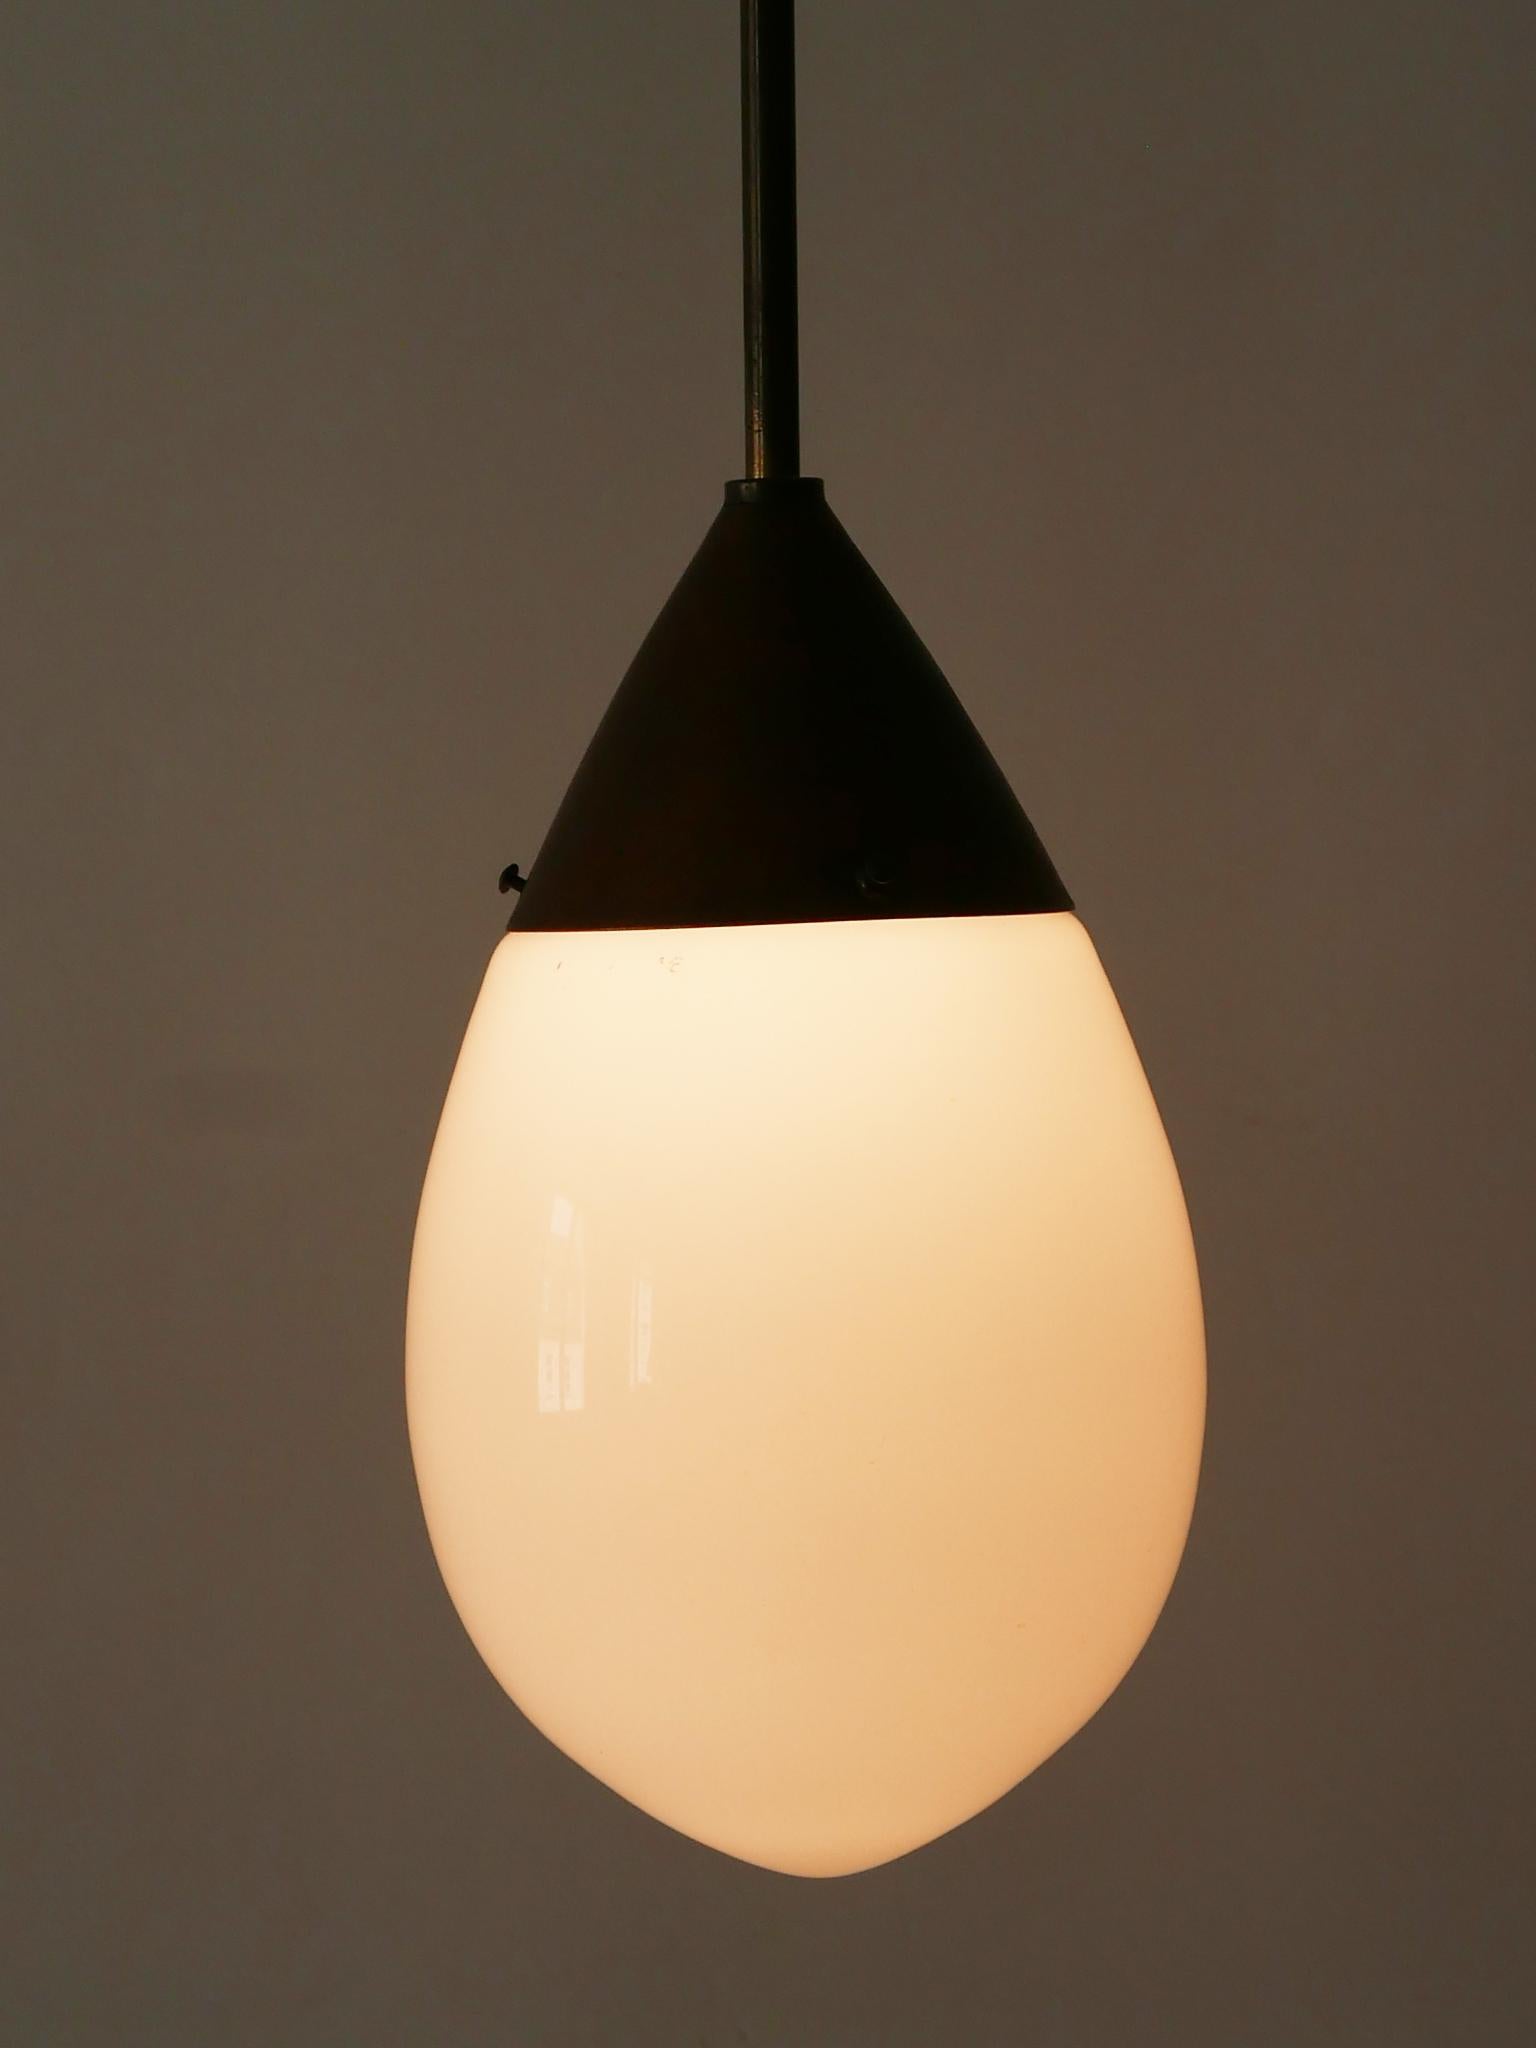 Exceptional Bauhaus Pendant Lamp or Hanging Light Drop by Siemens 1920s, Germany For Sale 3